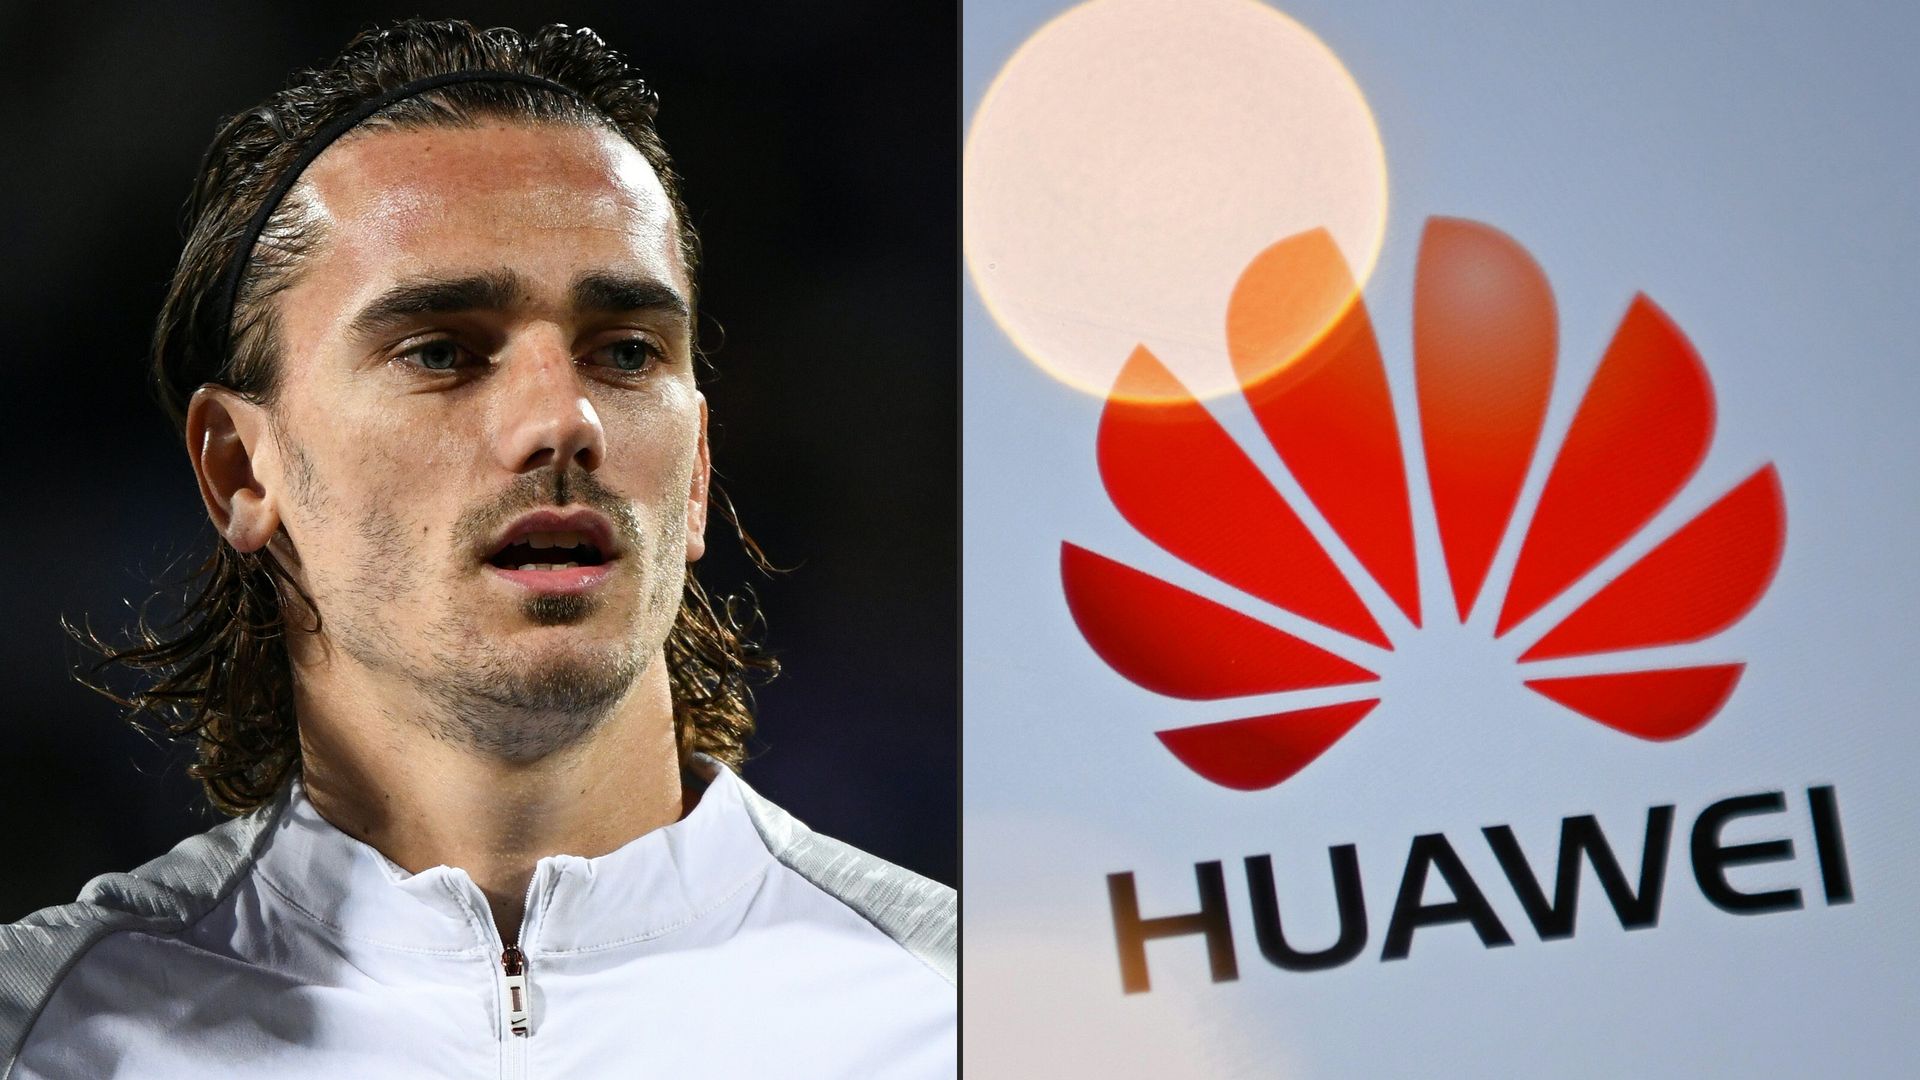 This combination of files pictures created shows France's forward Antoine Griezmann (L) and the logo of Chinese company Huawei in London on July 14, 2020. - 